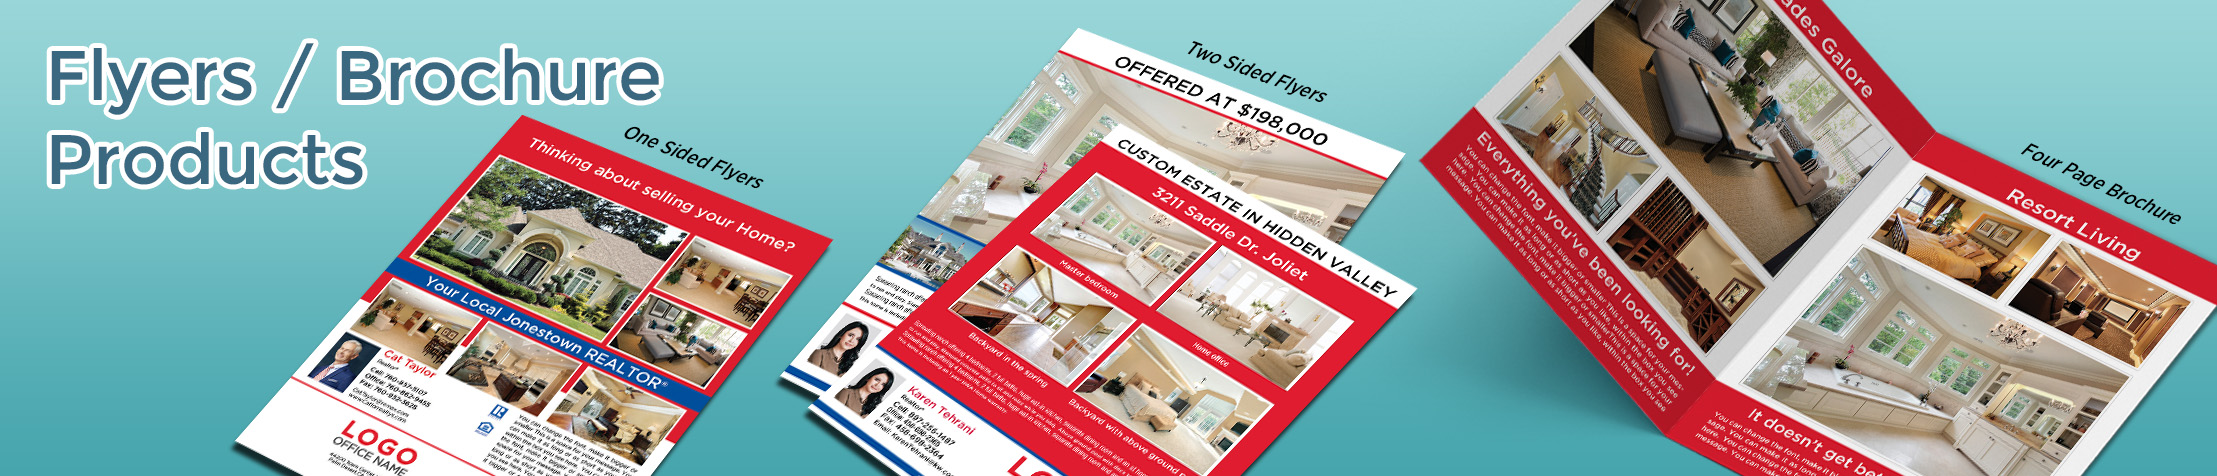 RE/MAX Real Estate Flyers and Brochures - RE/MAX flyer and brochure templates for open houses and marketing | BestPrintBuy.com